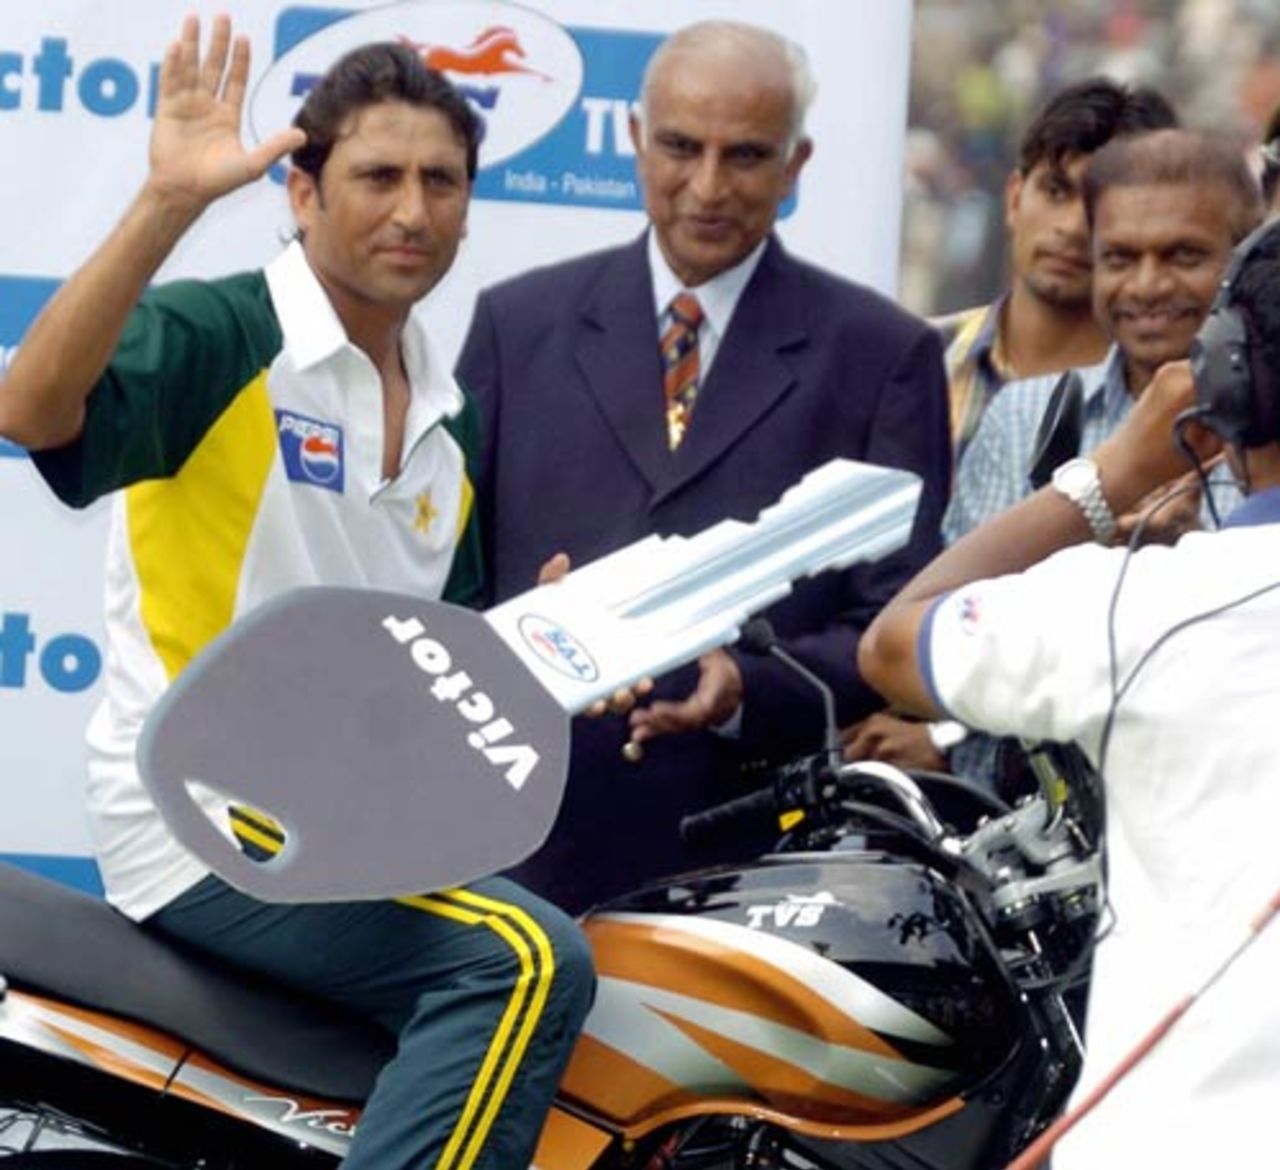 Younis Khan bagged the Man of the Match award for his 351 runs. He spent 25 hours in the field and took vital catches too, India v Pakistan, 3rd Test, Bangalore, 5th day, March 28, 2005